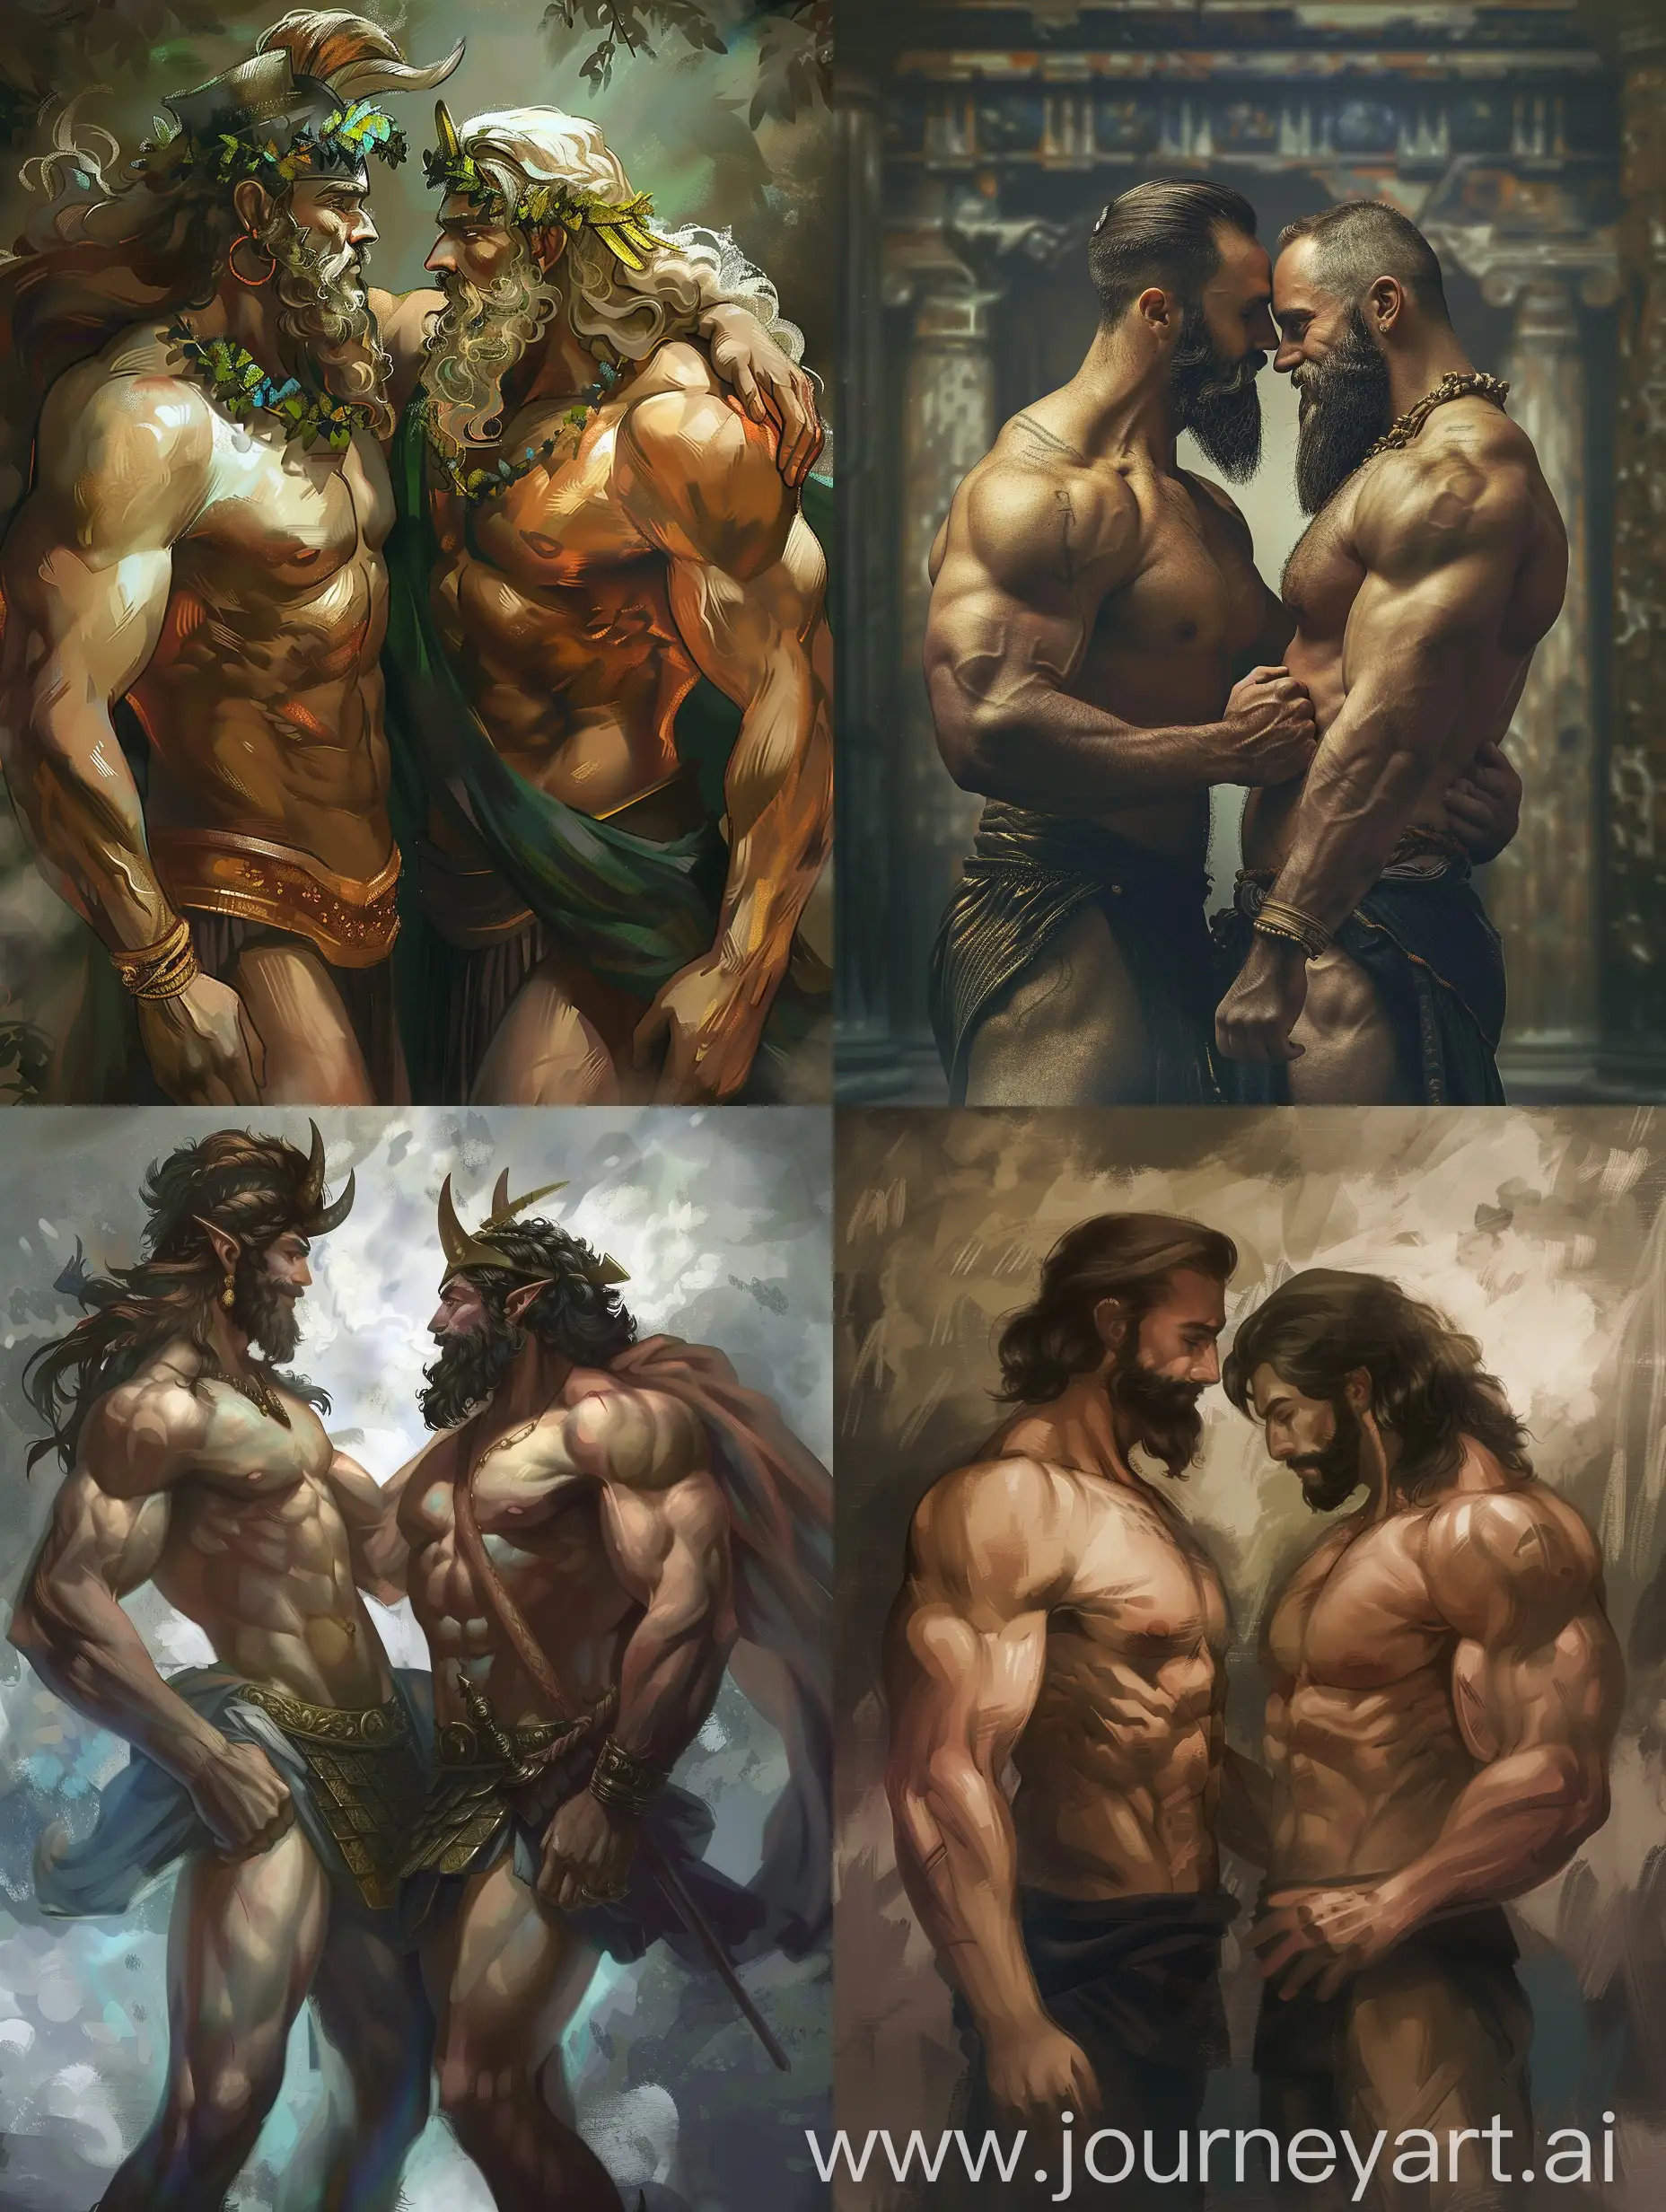 Two gods from Olympus, both male and muscular, in love